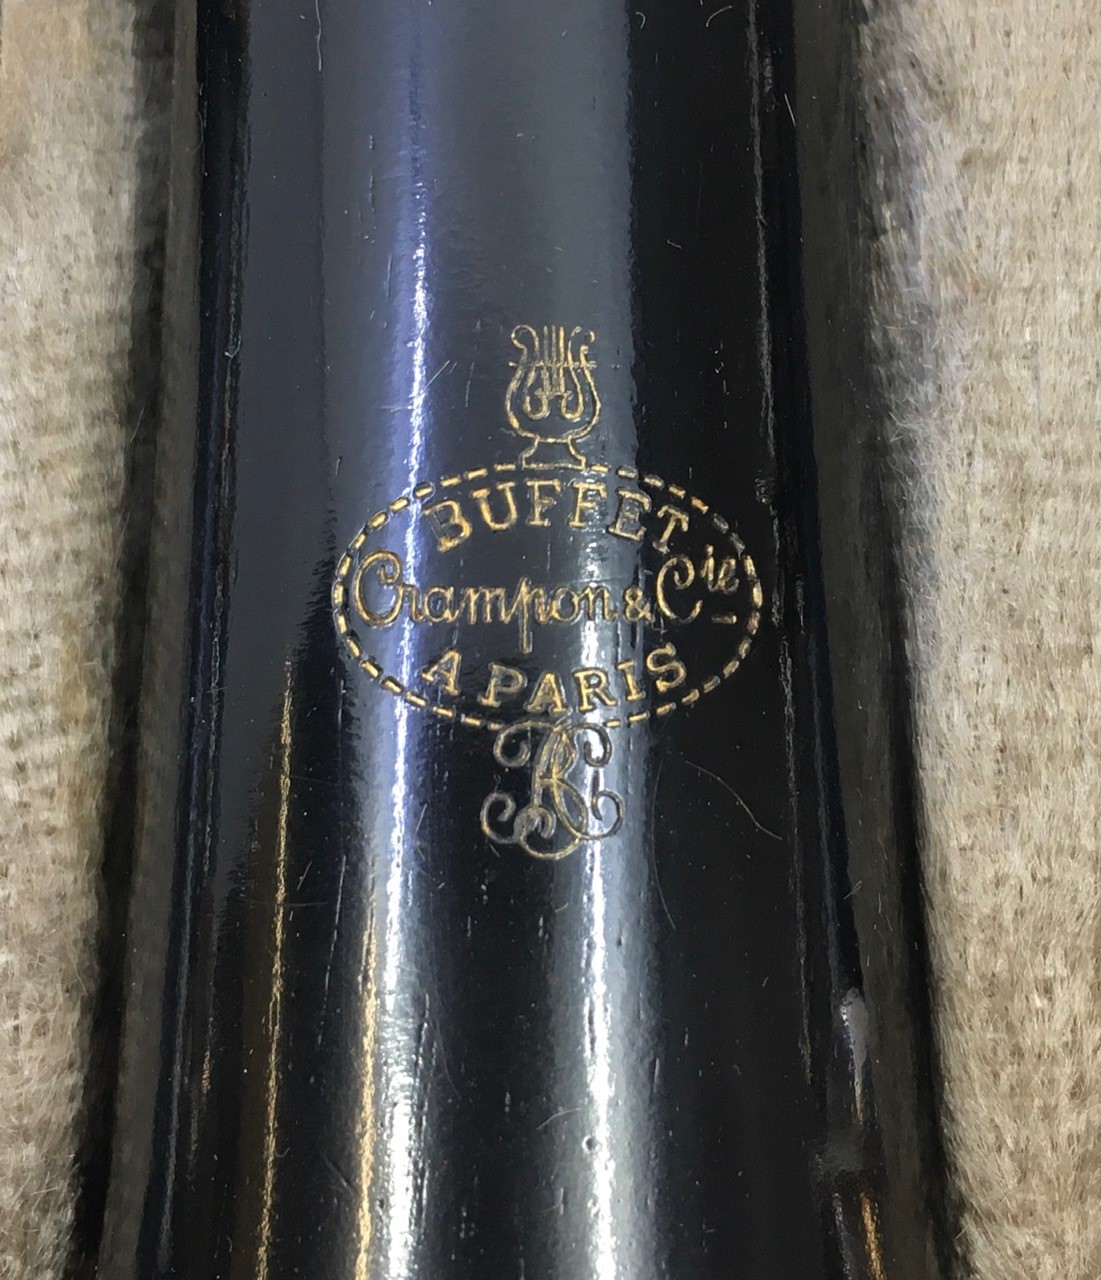 A Buffet Crampon10908 oboe in original fitted case. - Image 2 of 4